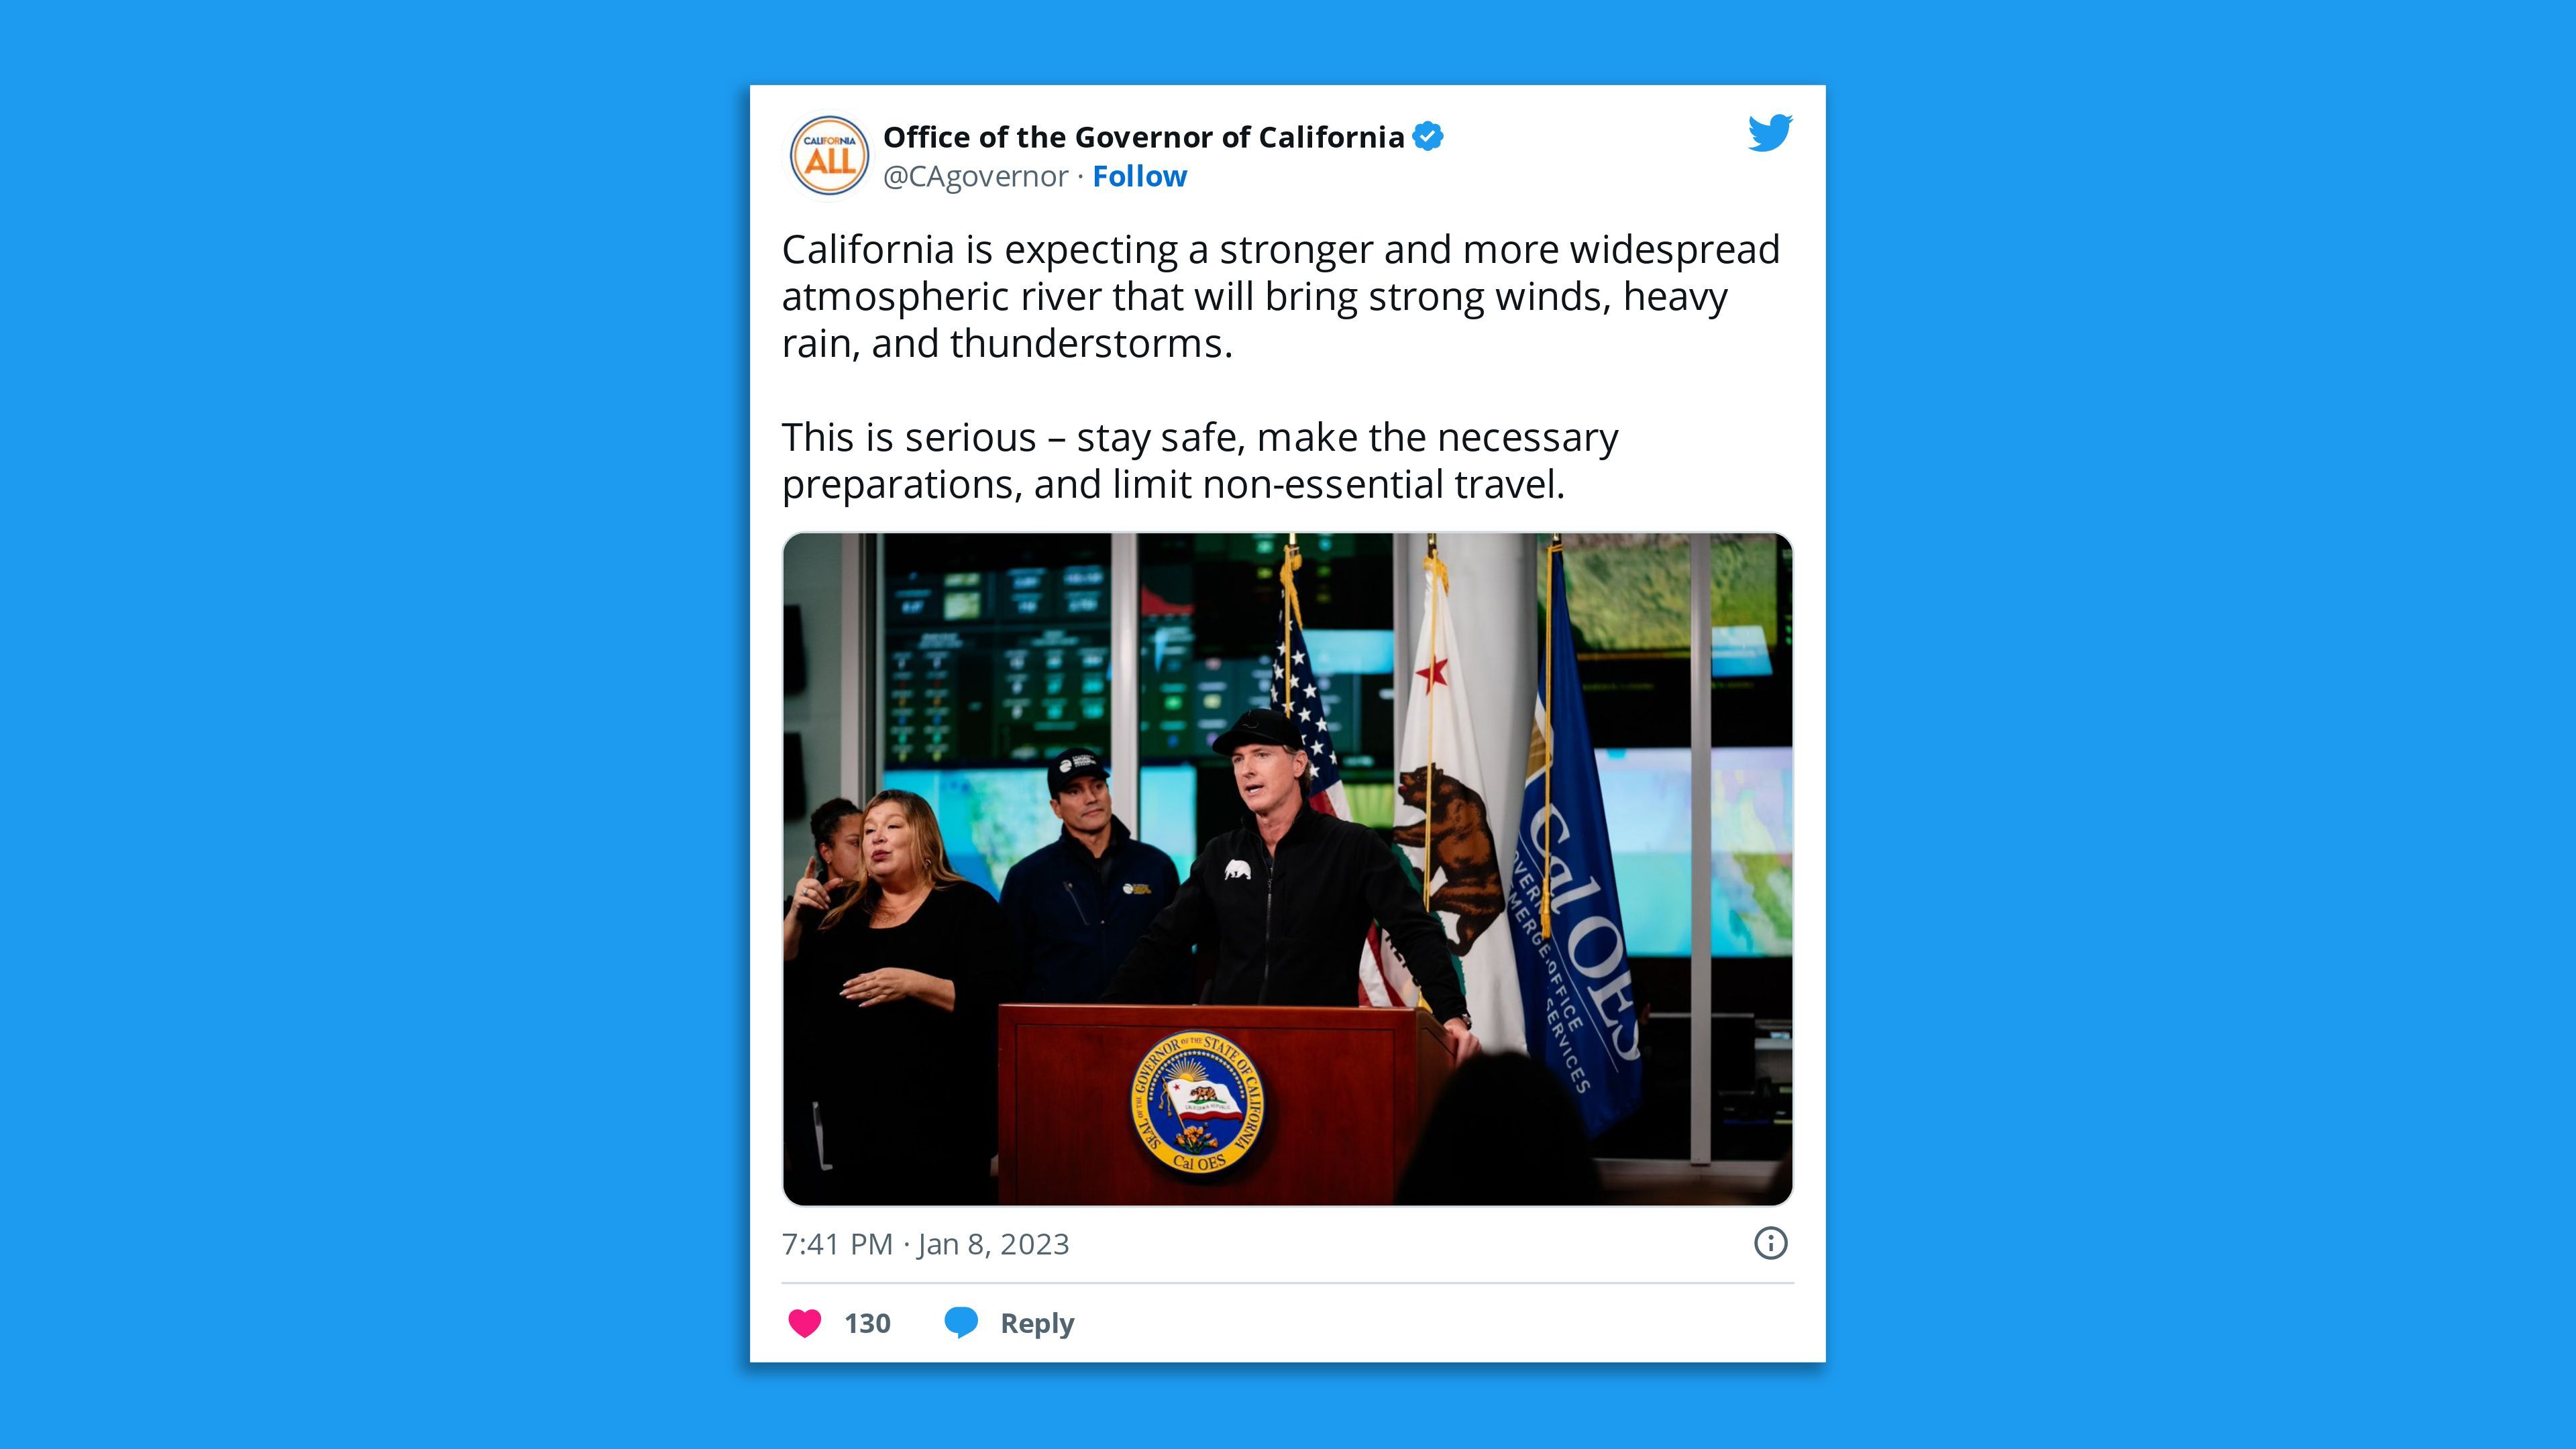 "California is expecting a stronger and more widespread atmospheric river that will bring strong winds, heavy rain, and thunderstorms," the governor's office warns in this screen-shotted tweet.